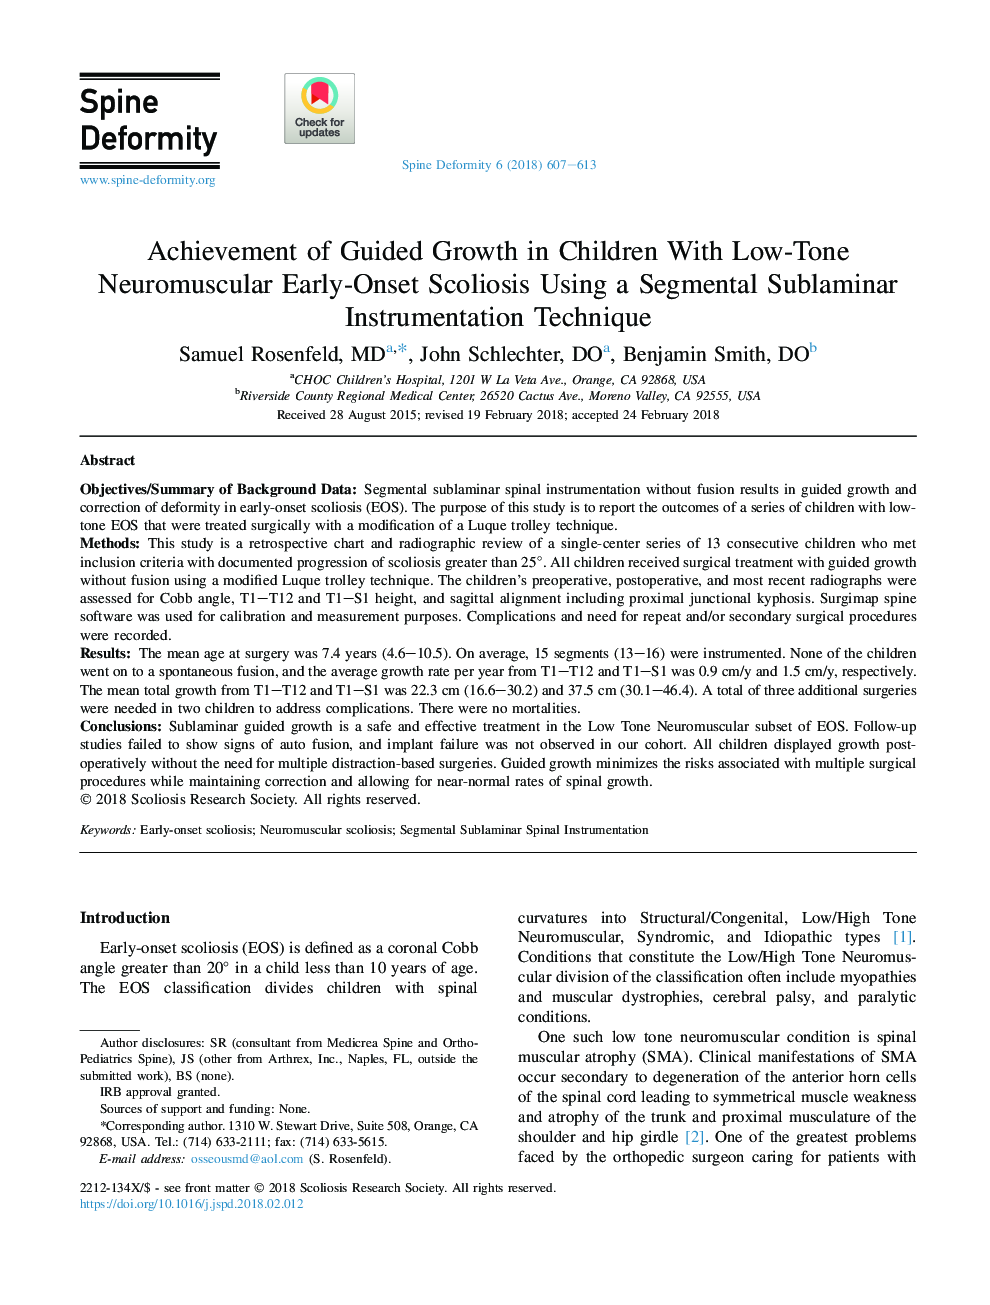 Achievement of Guided Growth in Children With Low-Tone Neuromuscular Early-Onset Scoliosis Using a Segmental Sublaminar Instrumentation Technique